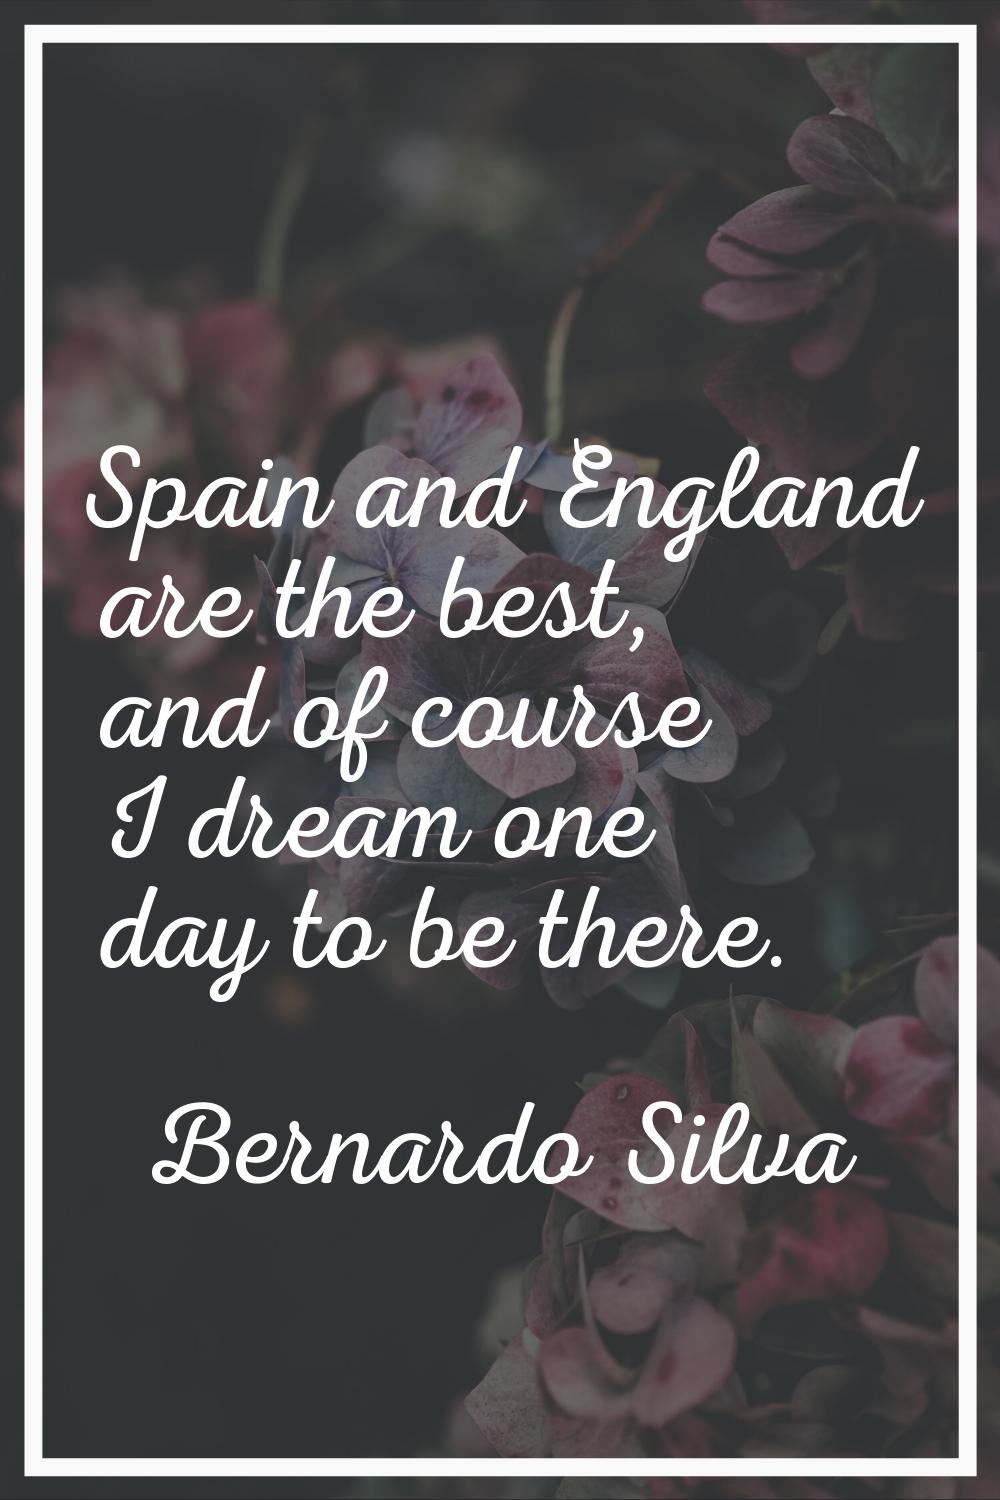 Spain and England are the best, and of course I dream one day to be there.